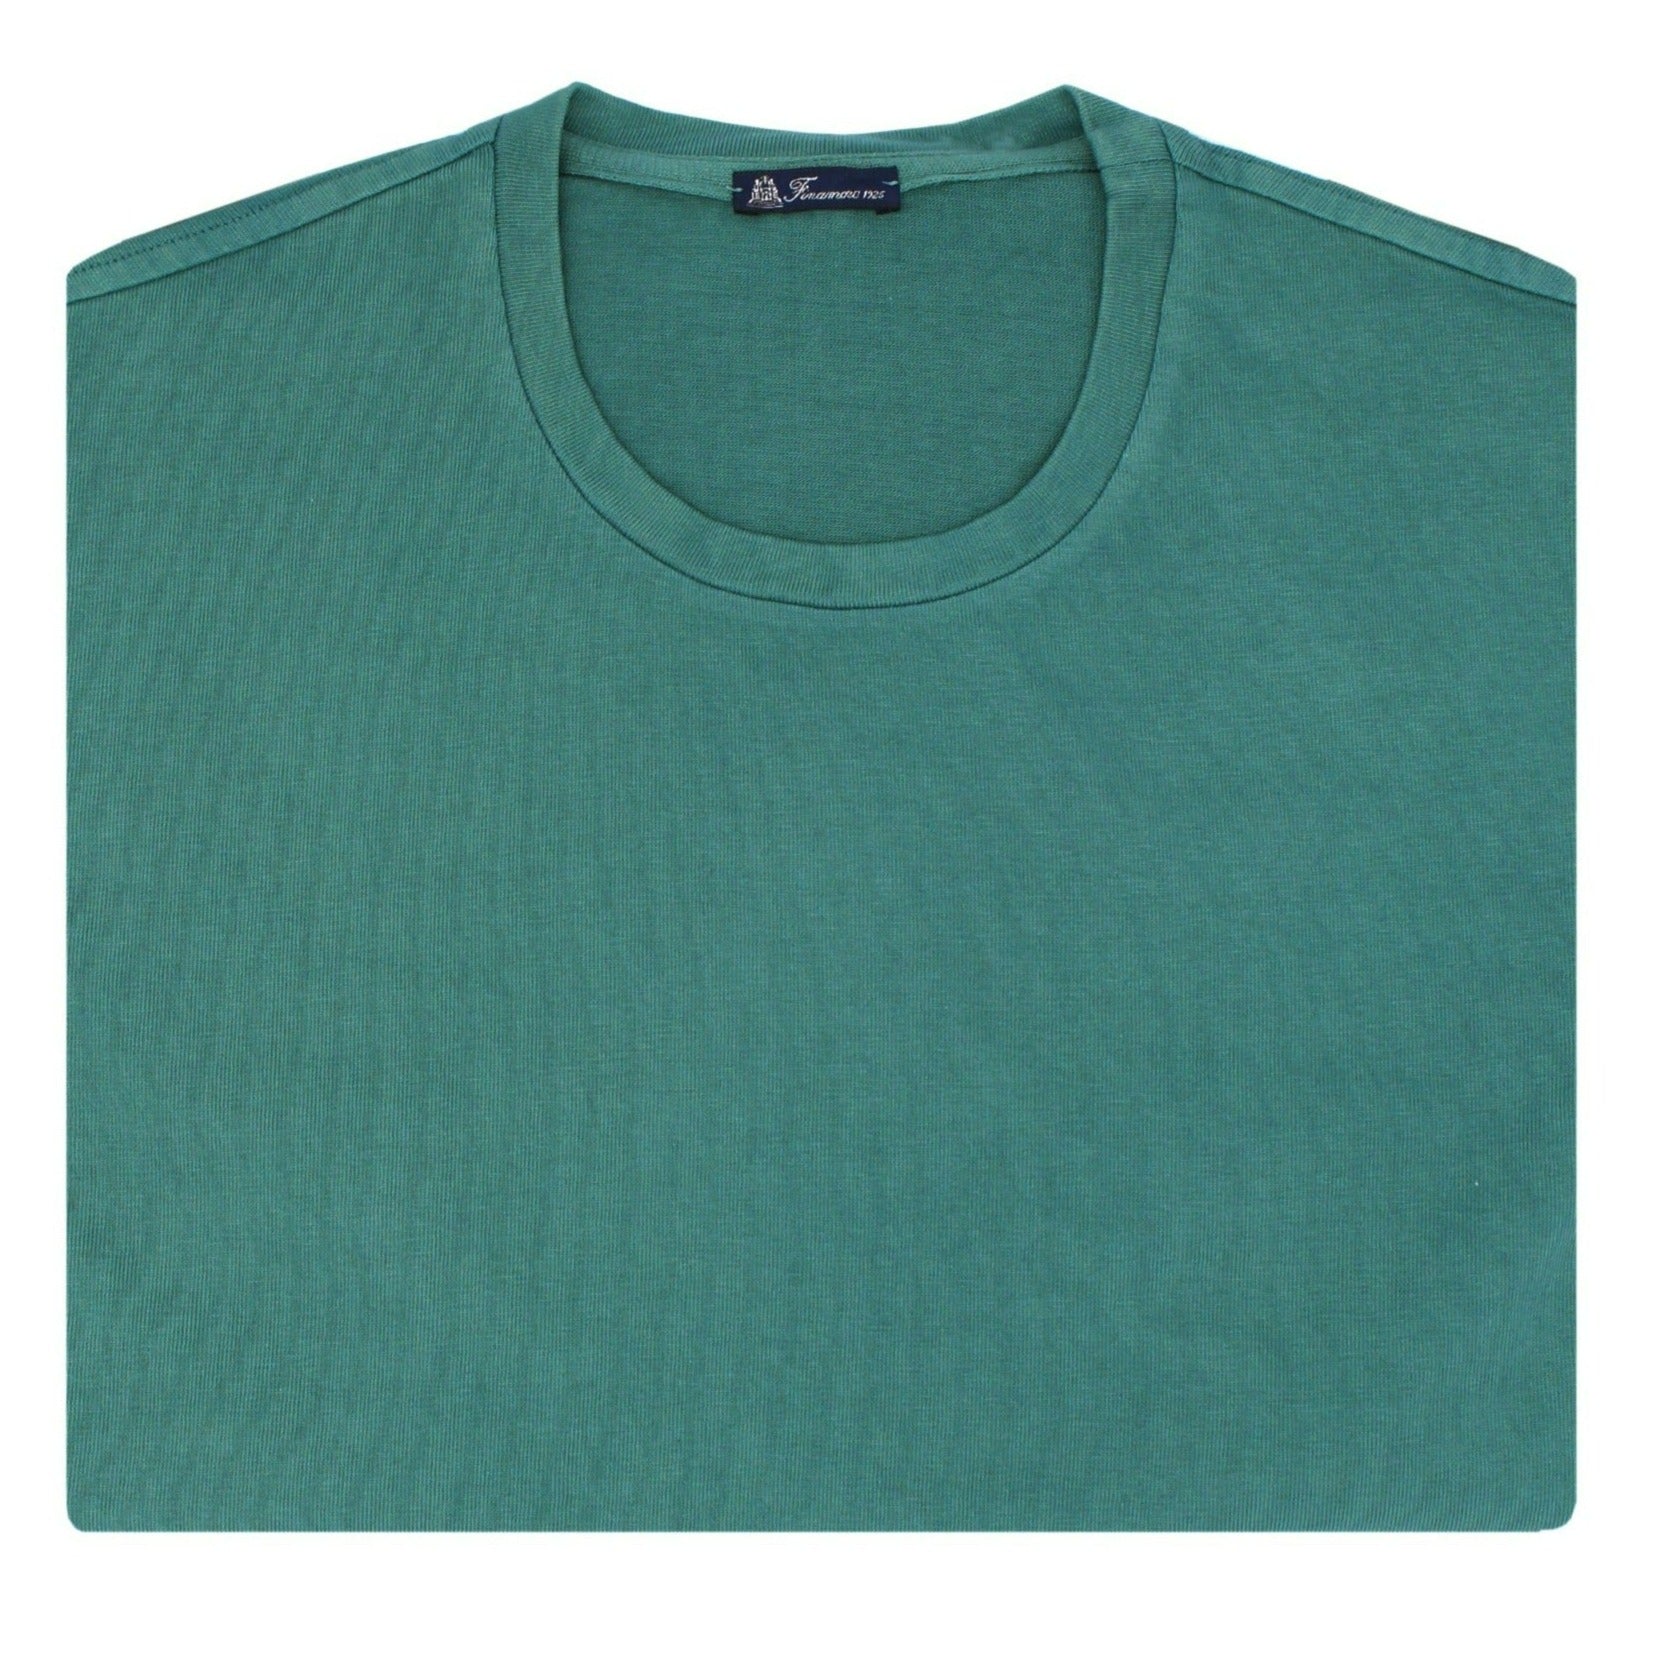 Green garment dyed cotton T-shirt with Finamore 1925 logo